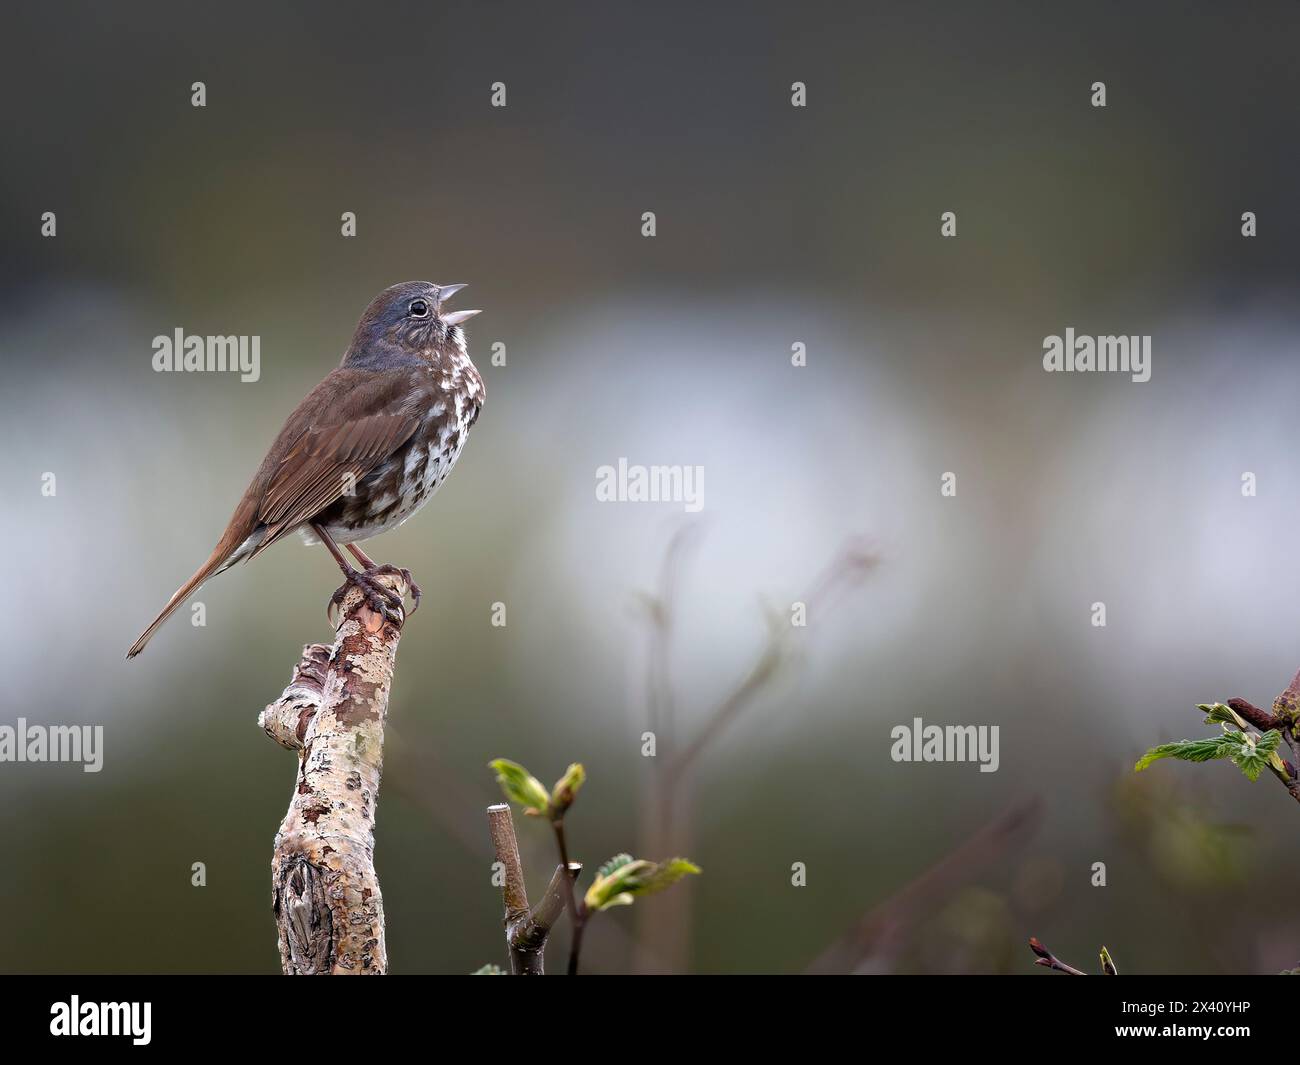 Fox sparrow (Passerella iliaca) sings a warning to guard its nesting territory from competing passerines in this image taken near McNeil Lagoon in ... Stock Photo